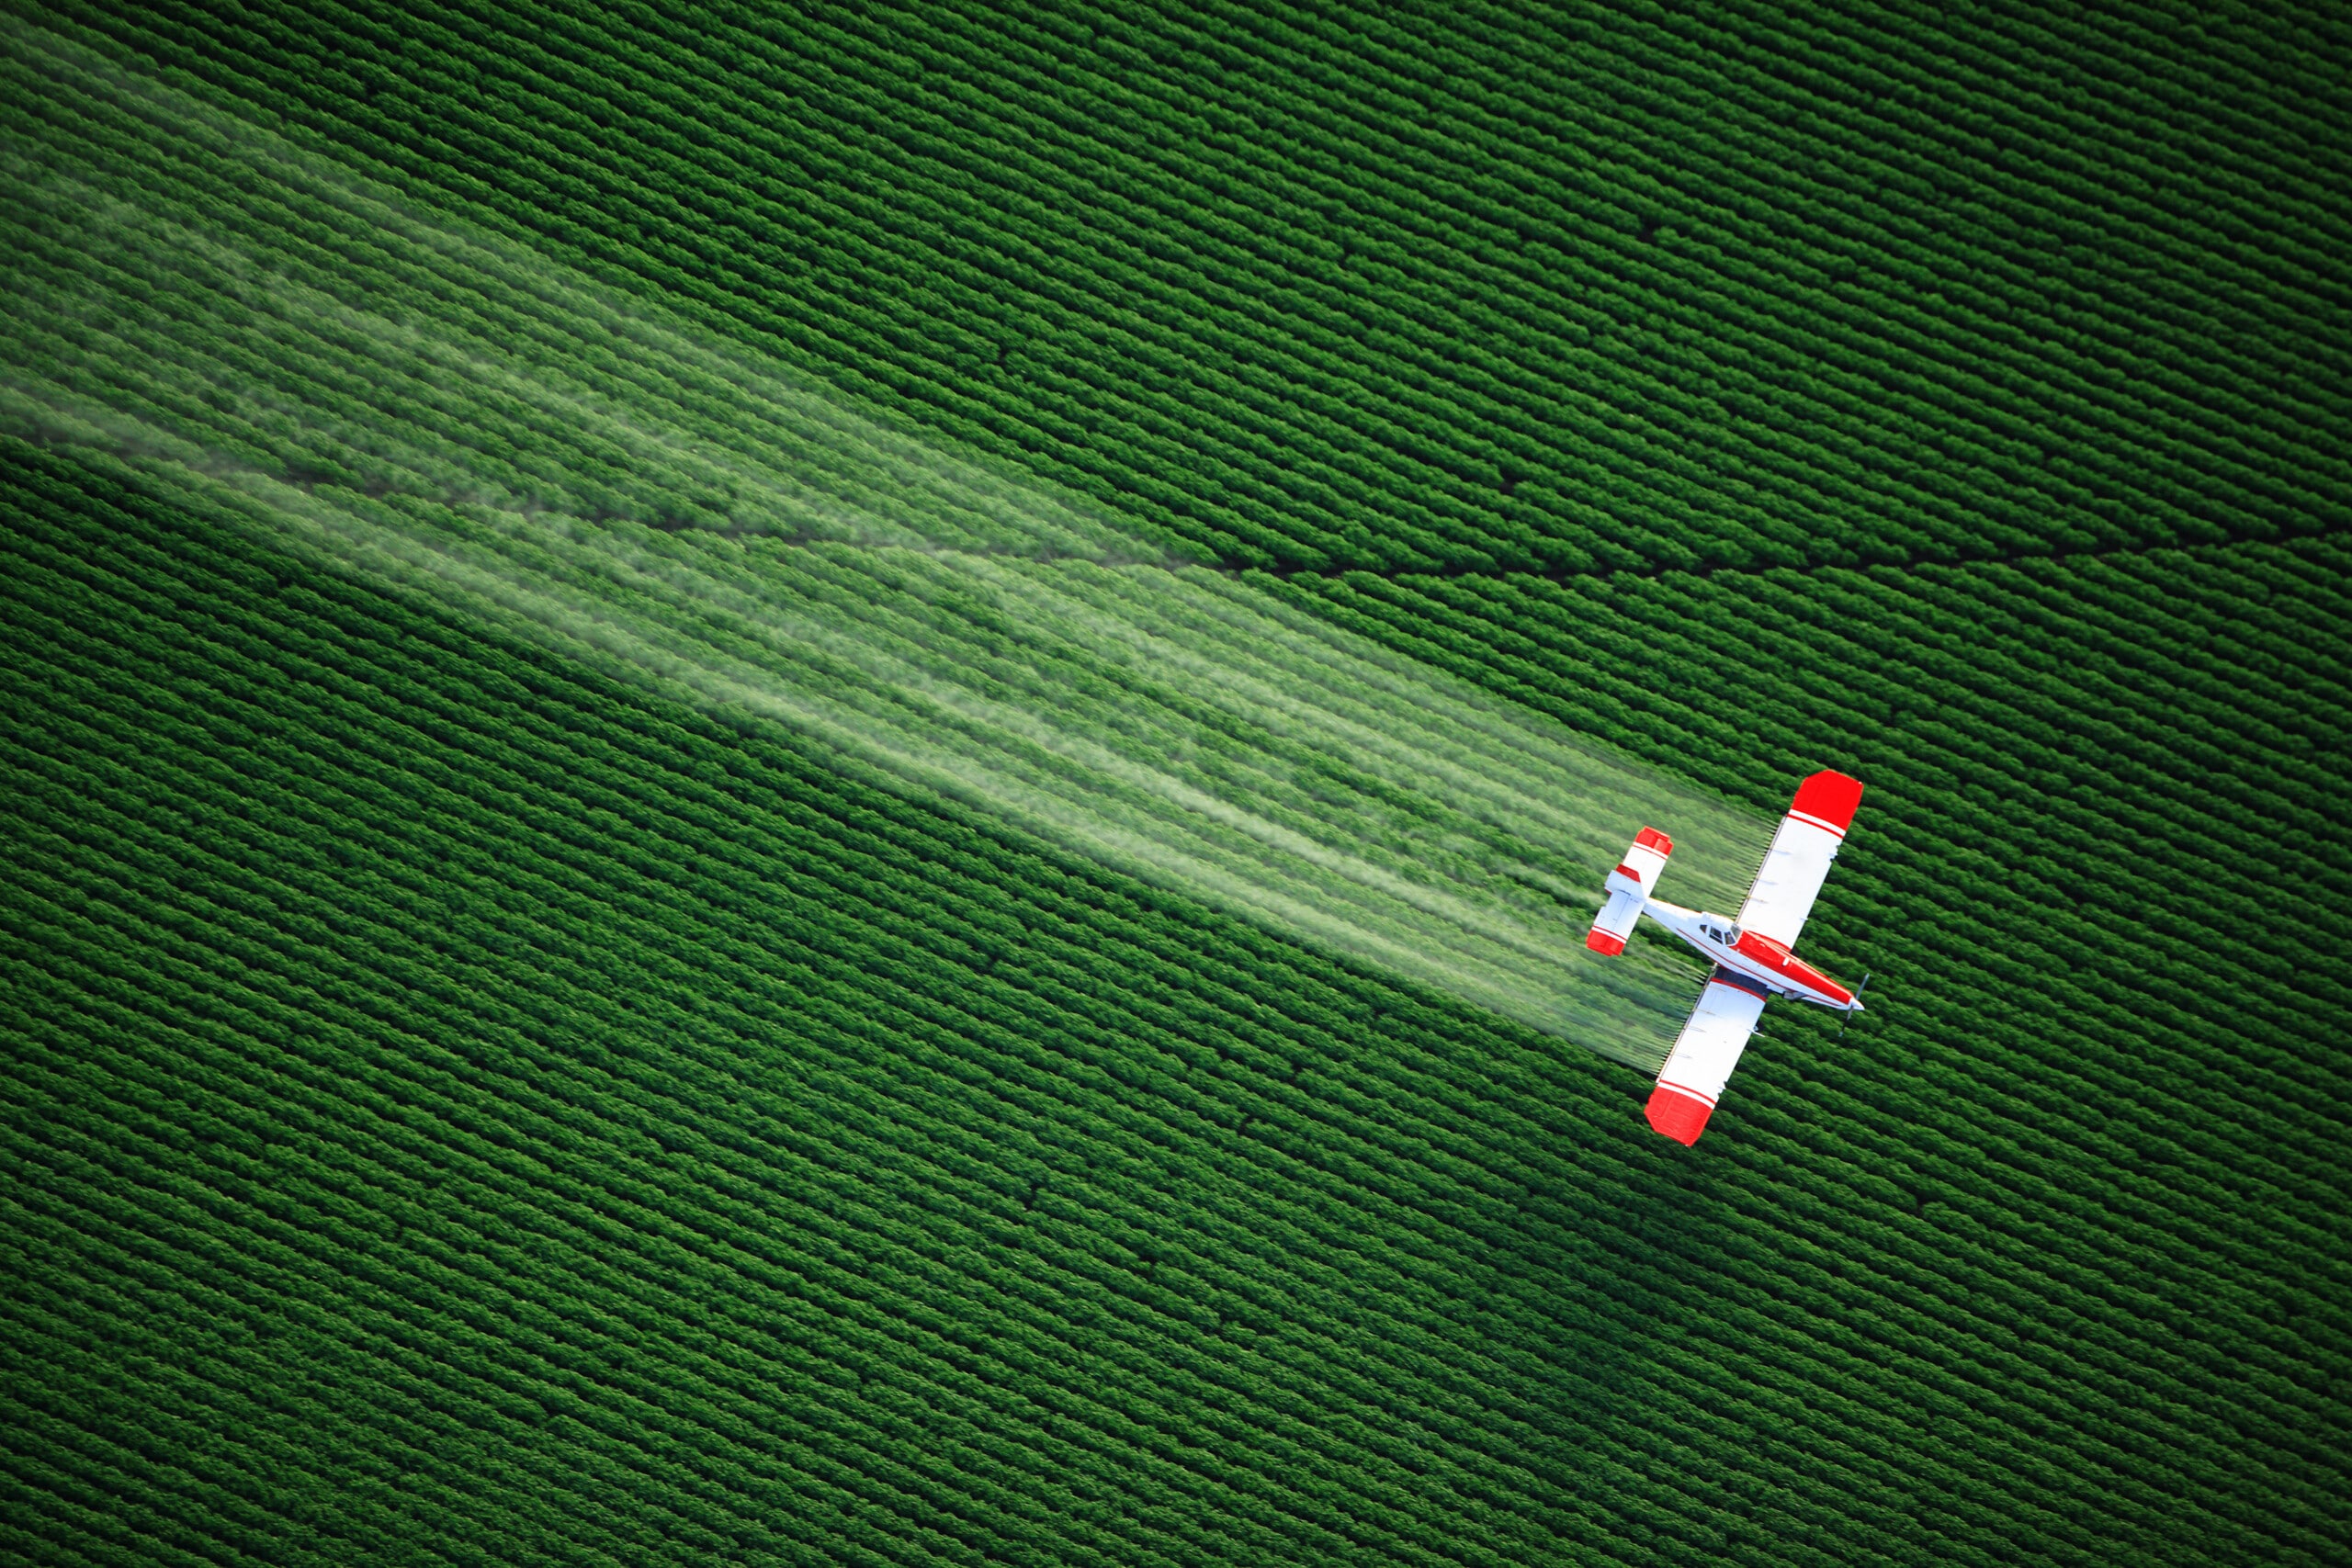 aerial-view-of-a-crop-duster-or-aerial-applicator-flying-low-and-spraying-agricultural-chemicals-over-lush-green-potato-fields-in-idaho